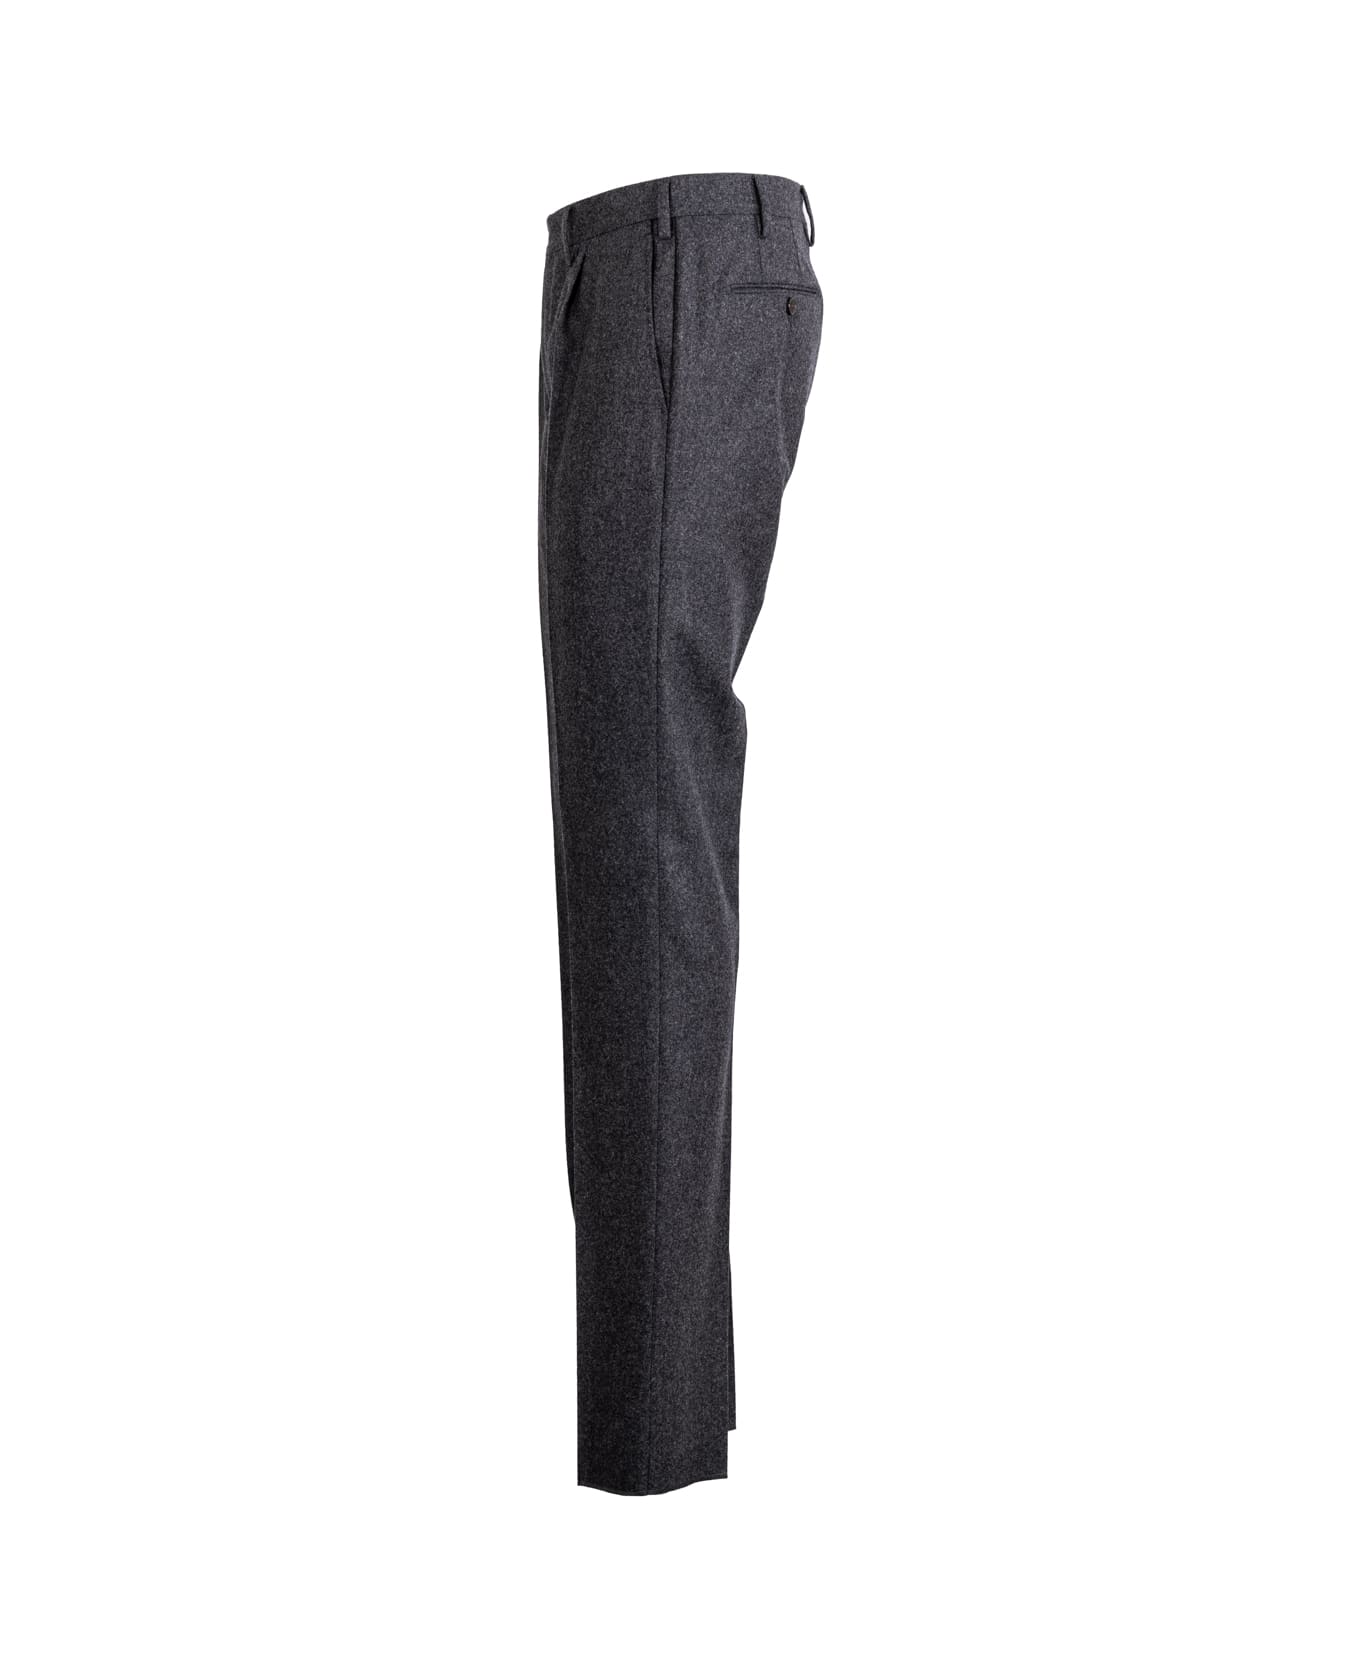 Germano Zama Germano Trousers Anthracite - Anthracite ボトムス